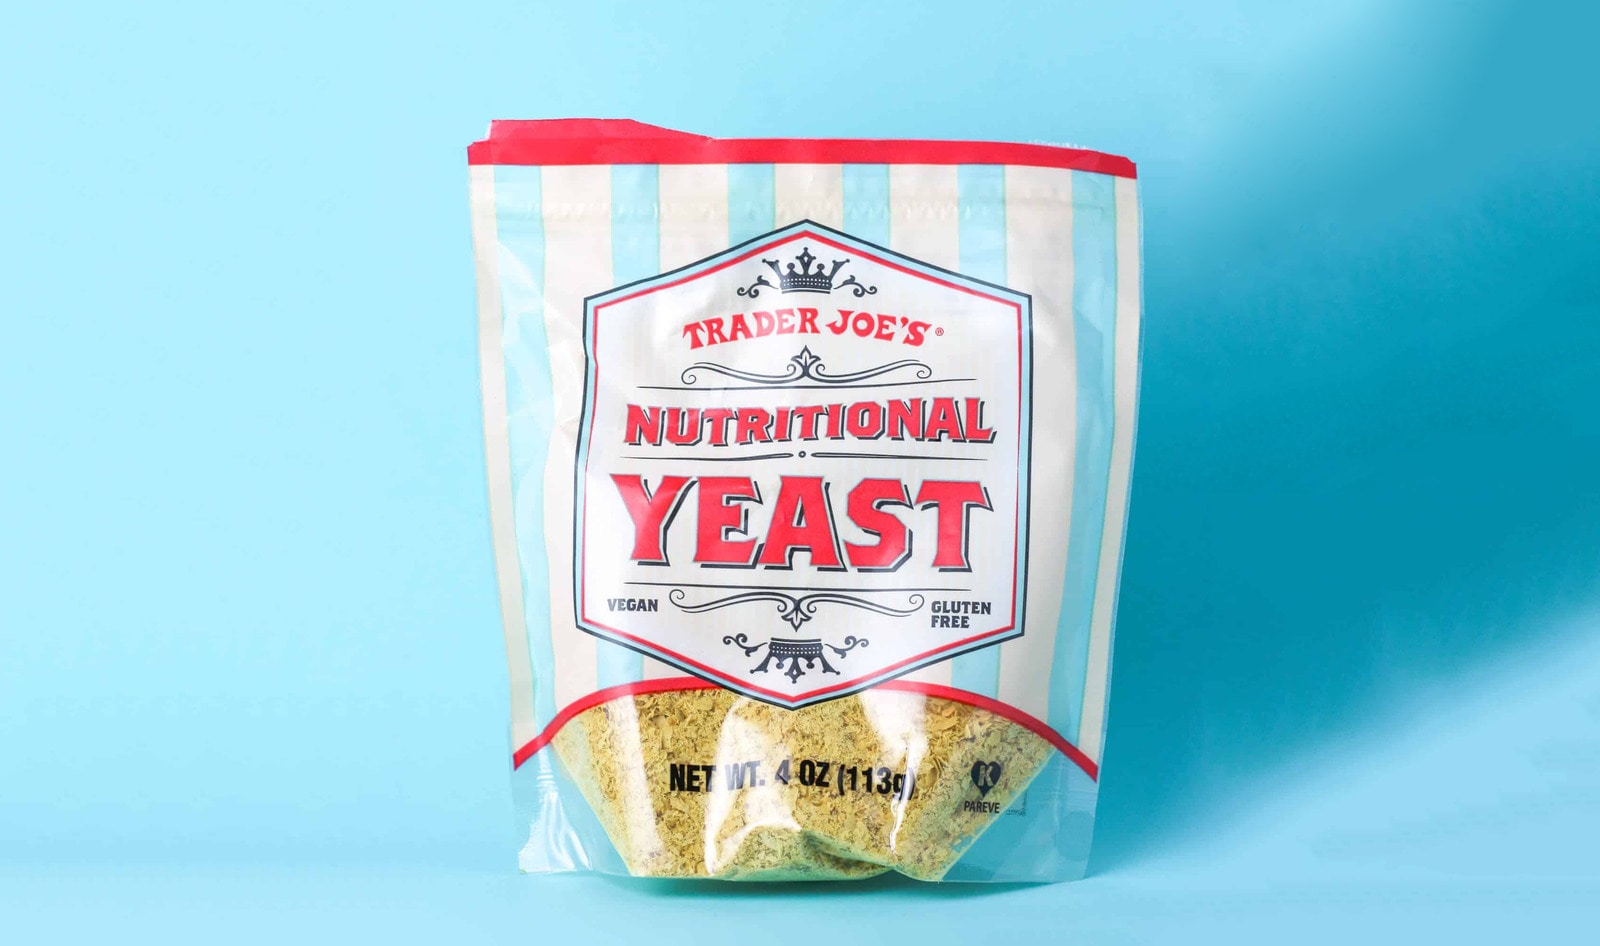 16 Ways to Use Nutritional Yeast&nbsp;